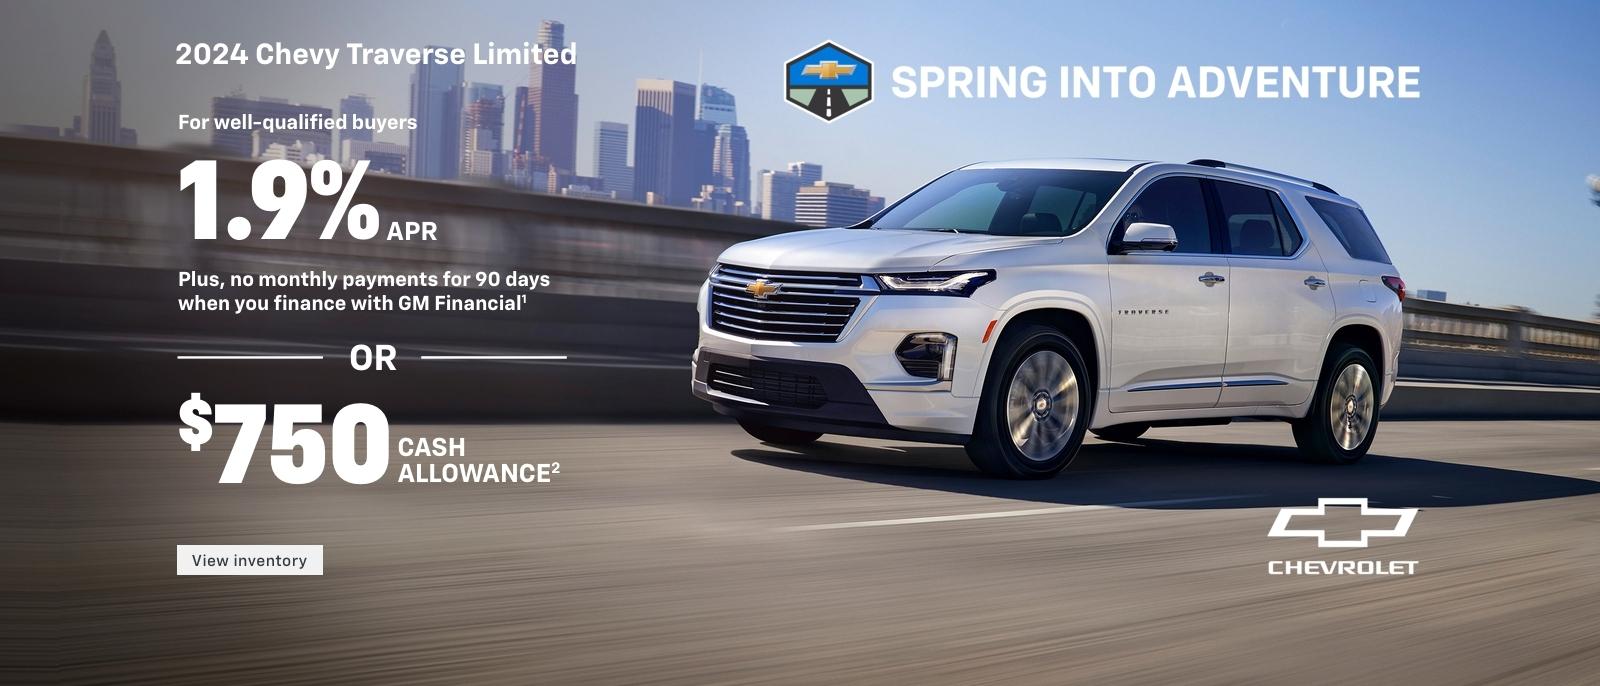 2024 Chevy Traverse Limited. Spring into Adventure. For well-qualified buyers 1.9% APR + no monthly payments for 90 DAYS when you finance with GM Financial. Or, $750 cash allowance.